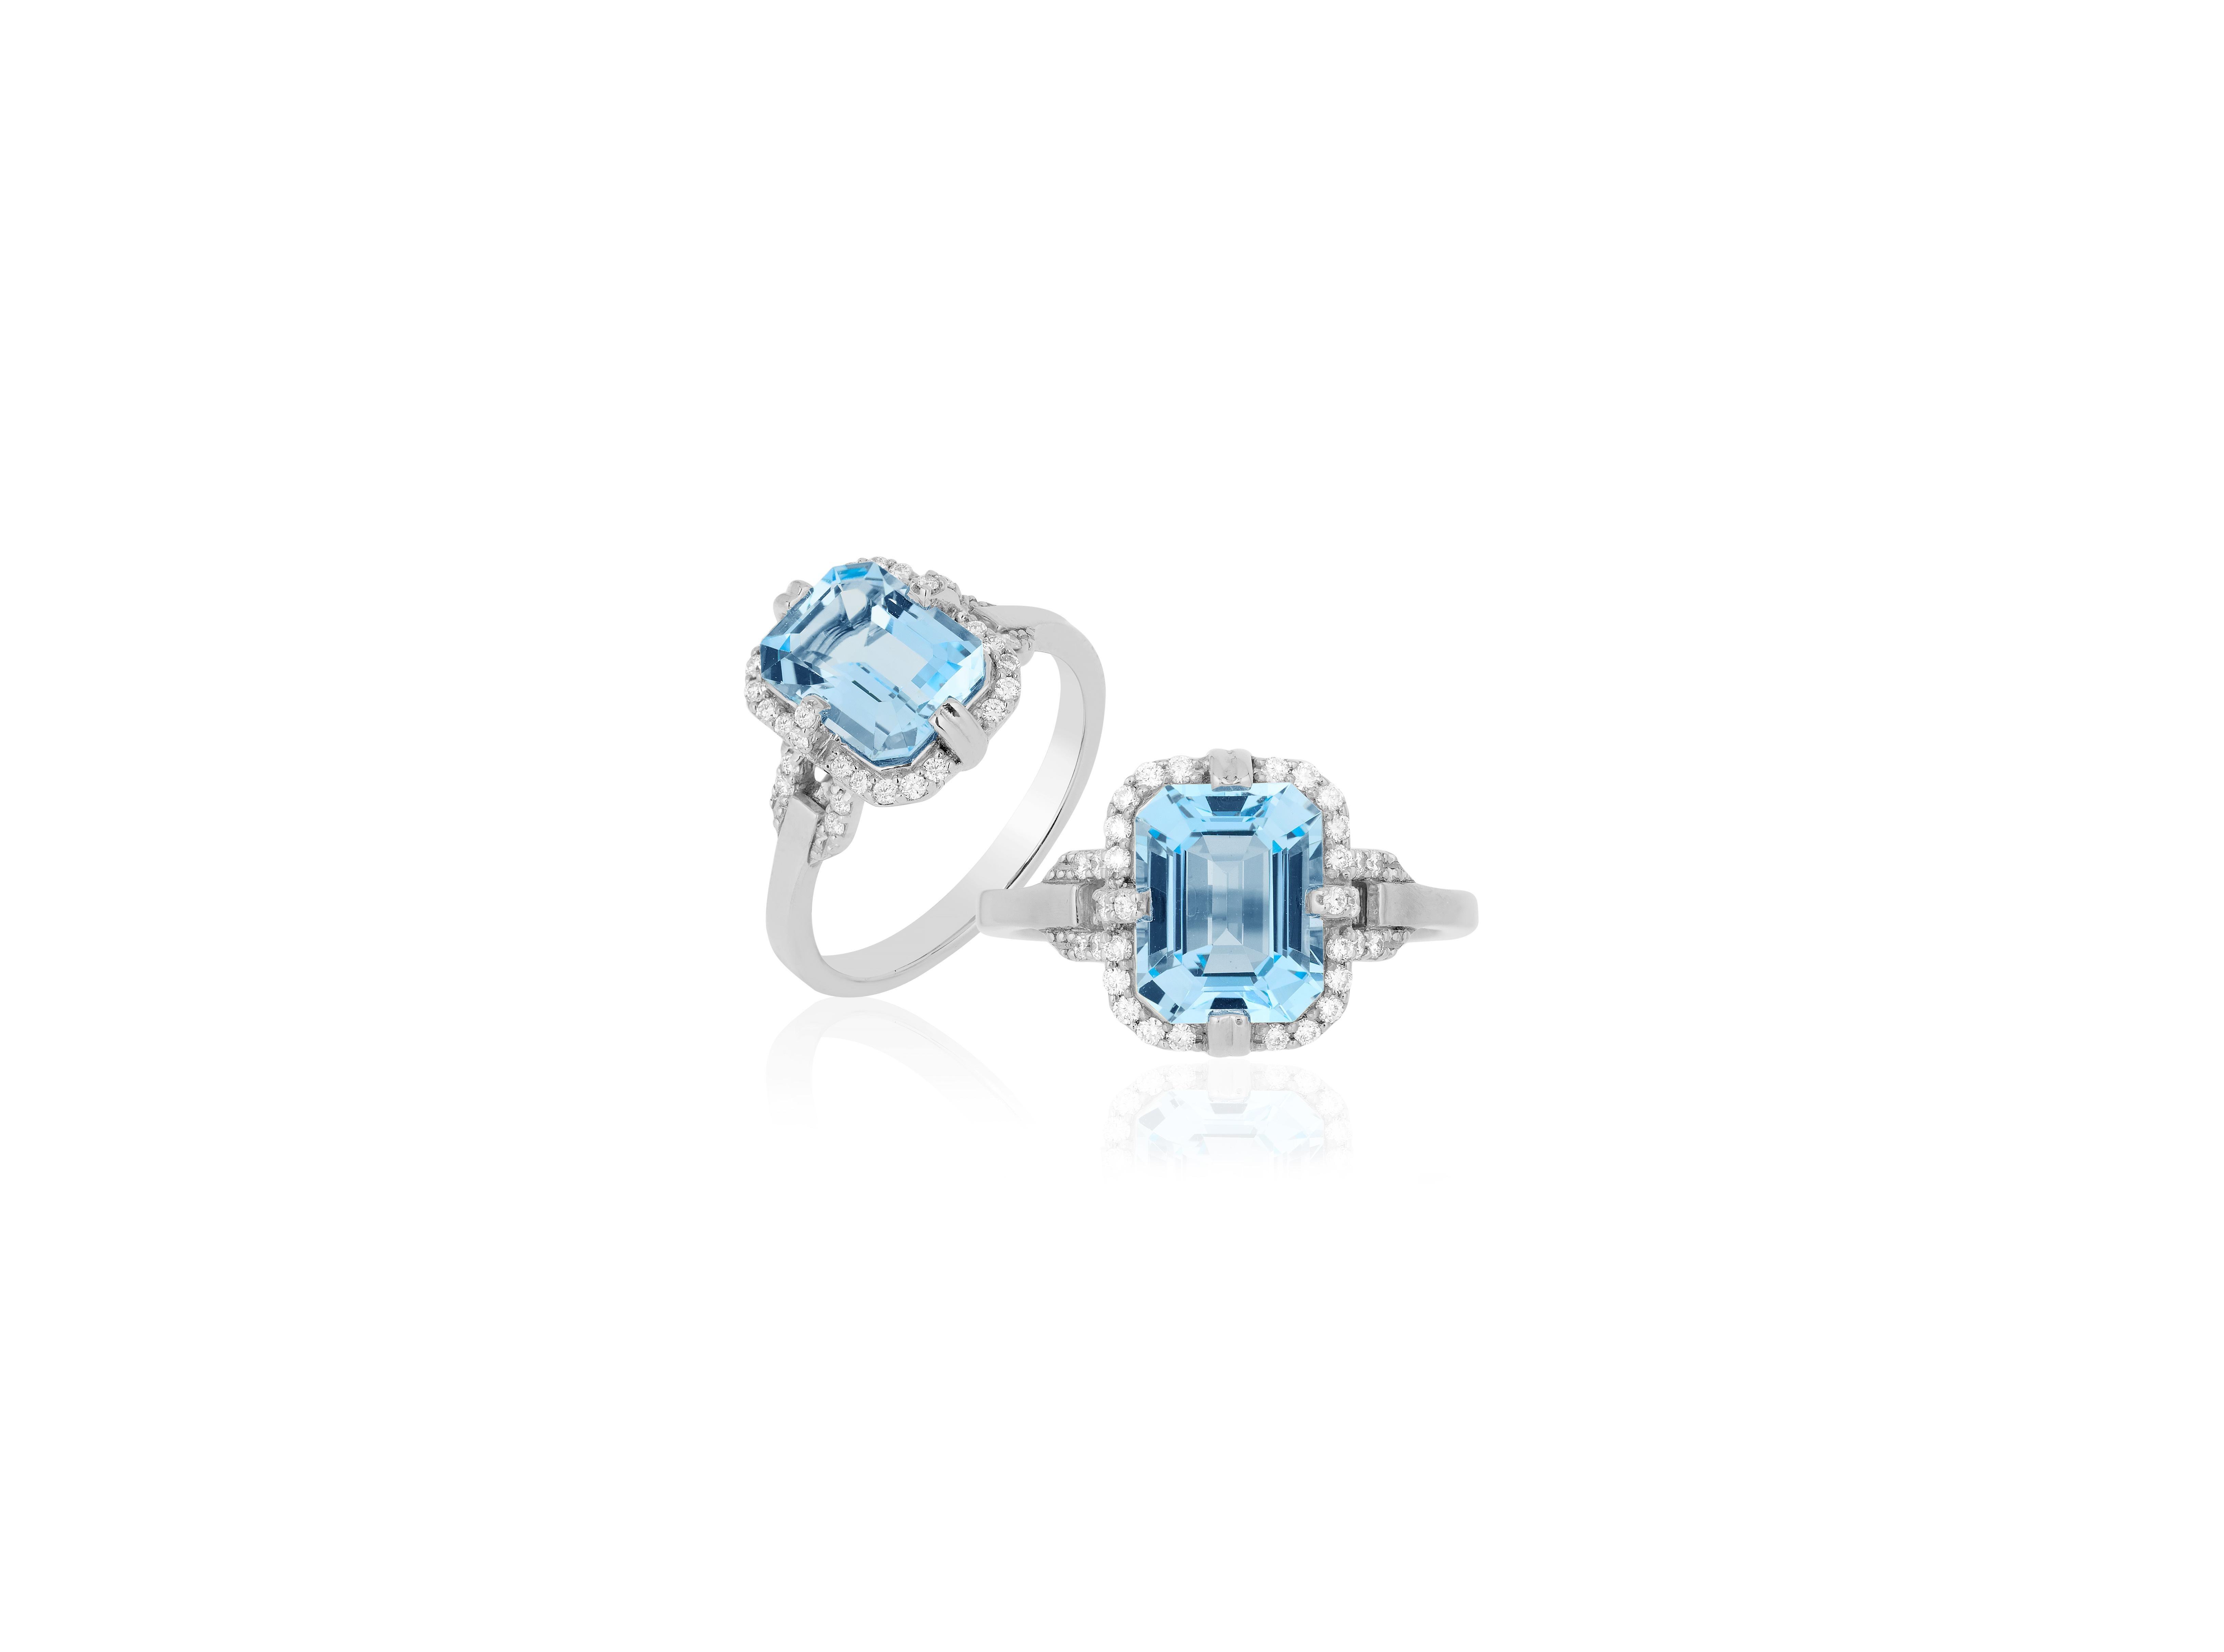 Blue Topaz Emerald Cut Ring in 18K White Gold with Diamonds from 'Gossip' Collection. Like any good piece of gossip, this collection carries a hint of shock value. They will have everyone in suspense about what Goshwara will do next.

* Gemstone